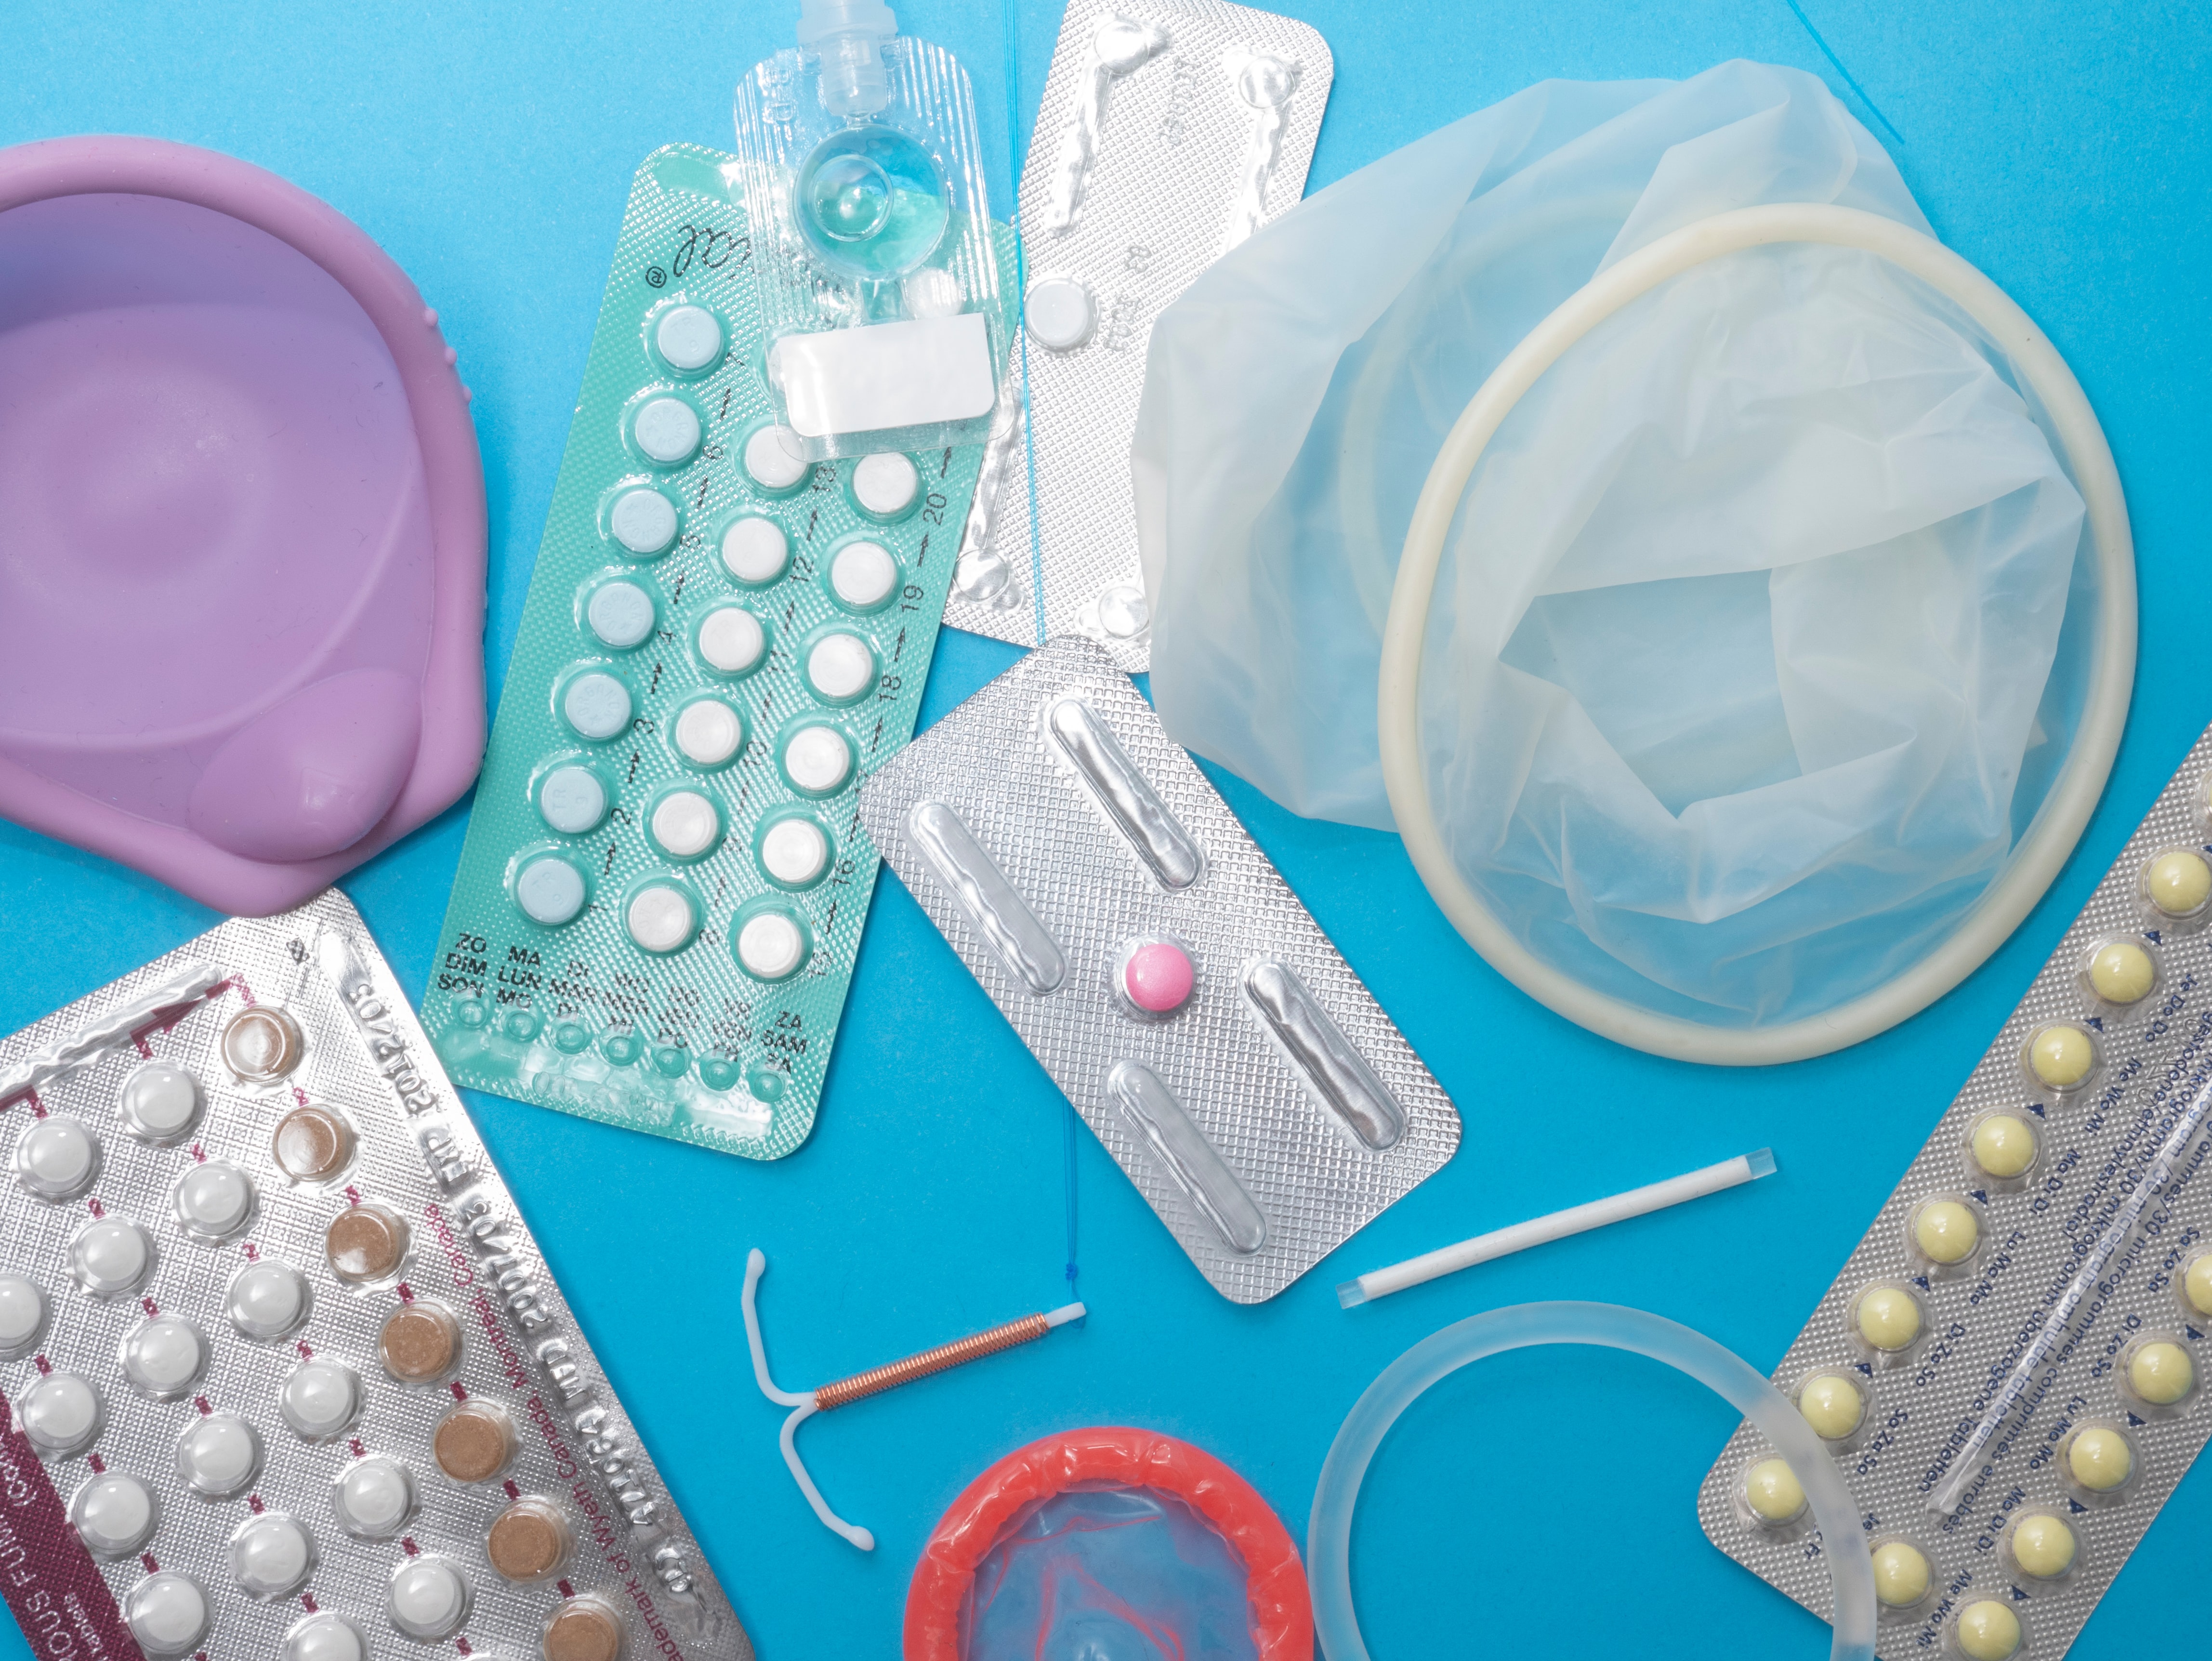 A flat lay of bIrth control pills, IUDs, condoms, and other contraceptives against a blue background